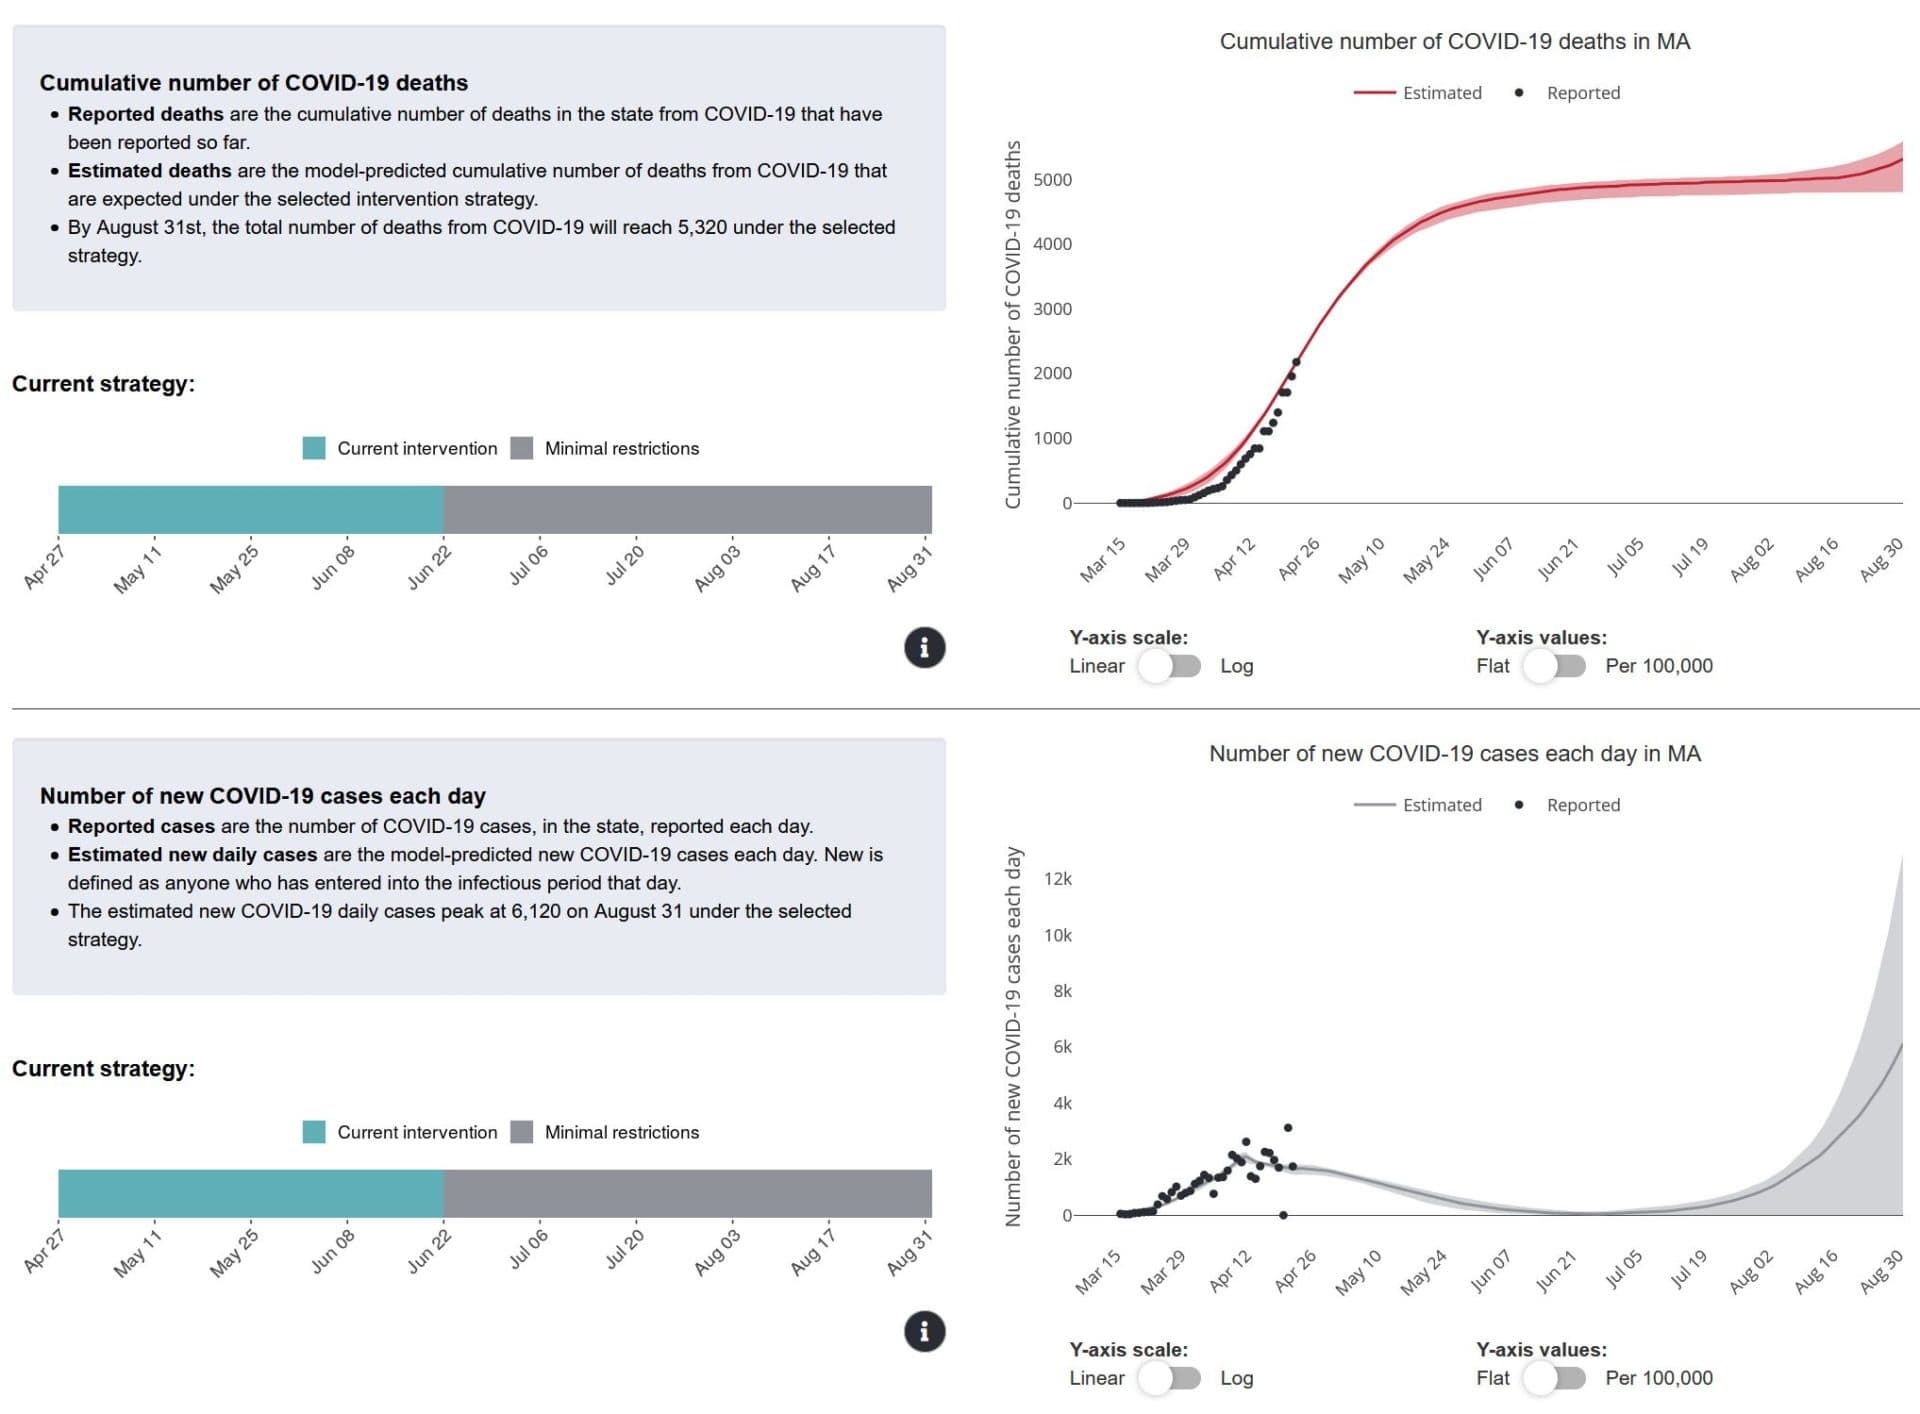 This model from MGH, Harvard, Boston Medical Center and Georgia Tech provides a forecast of the pandemic depending on how long states or the U.S. as a whole continue to practice social distancing and other restrictions. The scenario above shows predictions if current restrictions continue until June 22. (Harvard University)